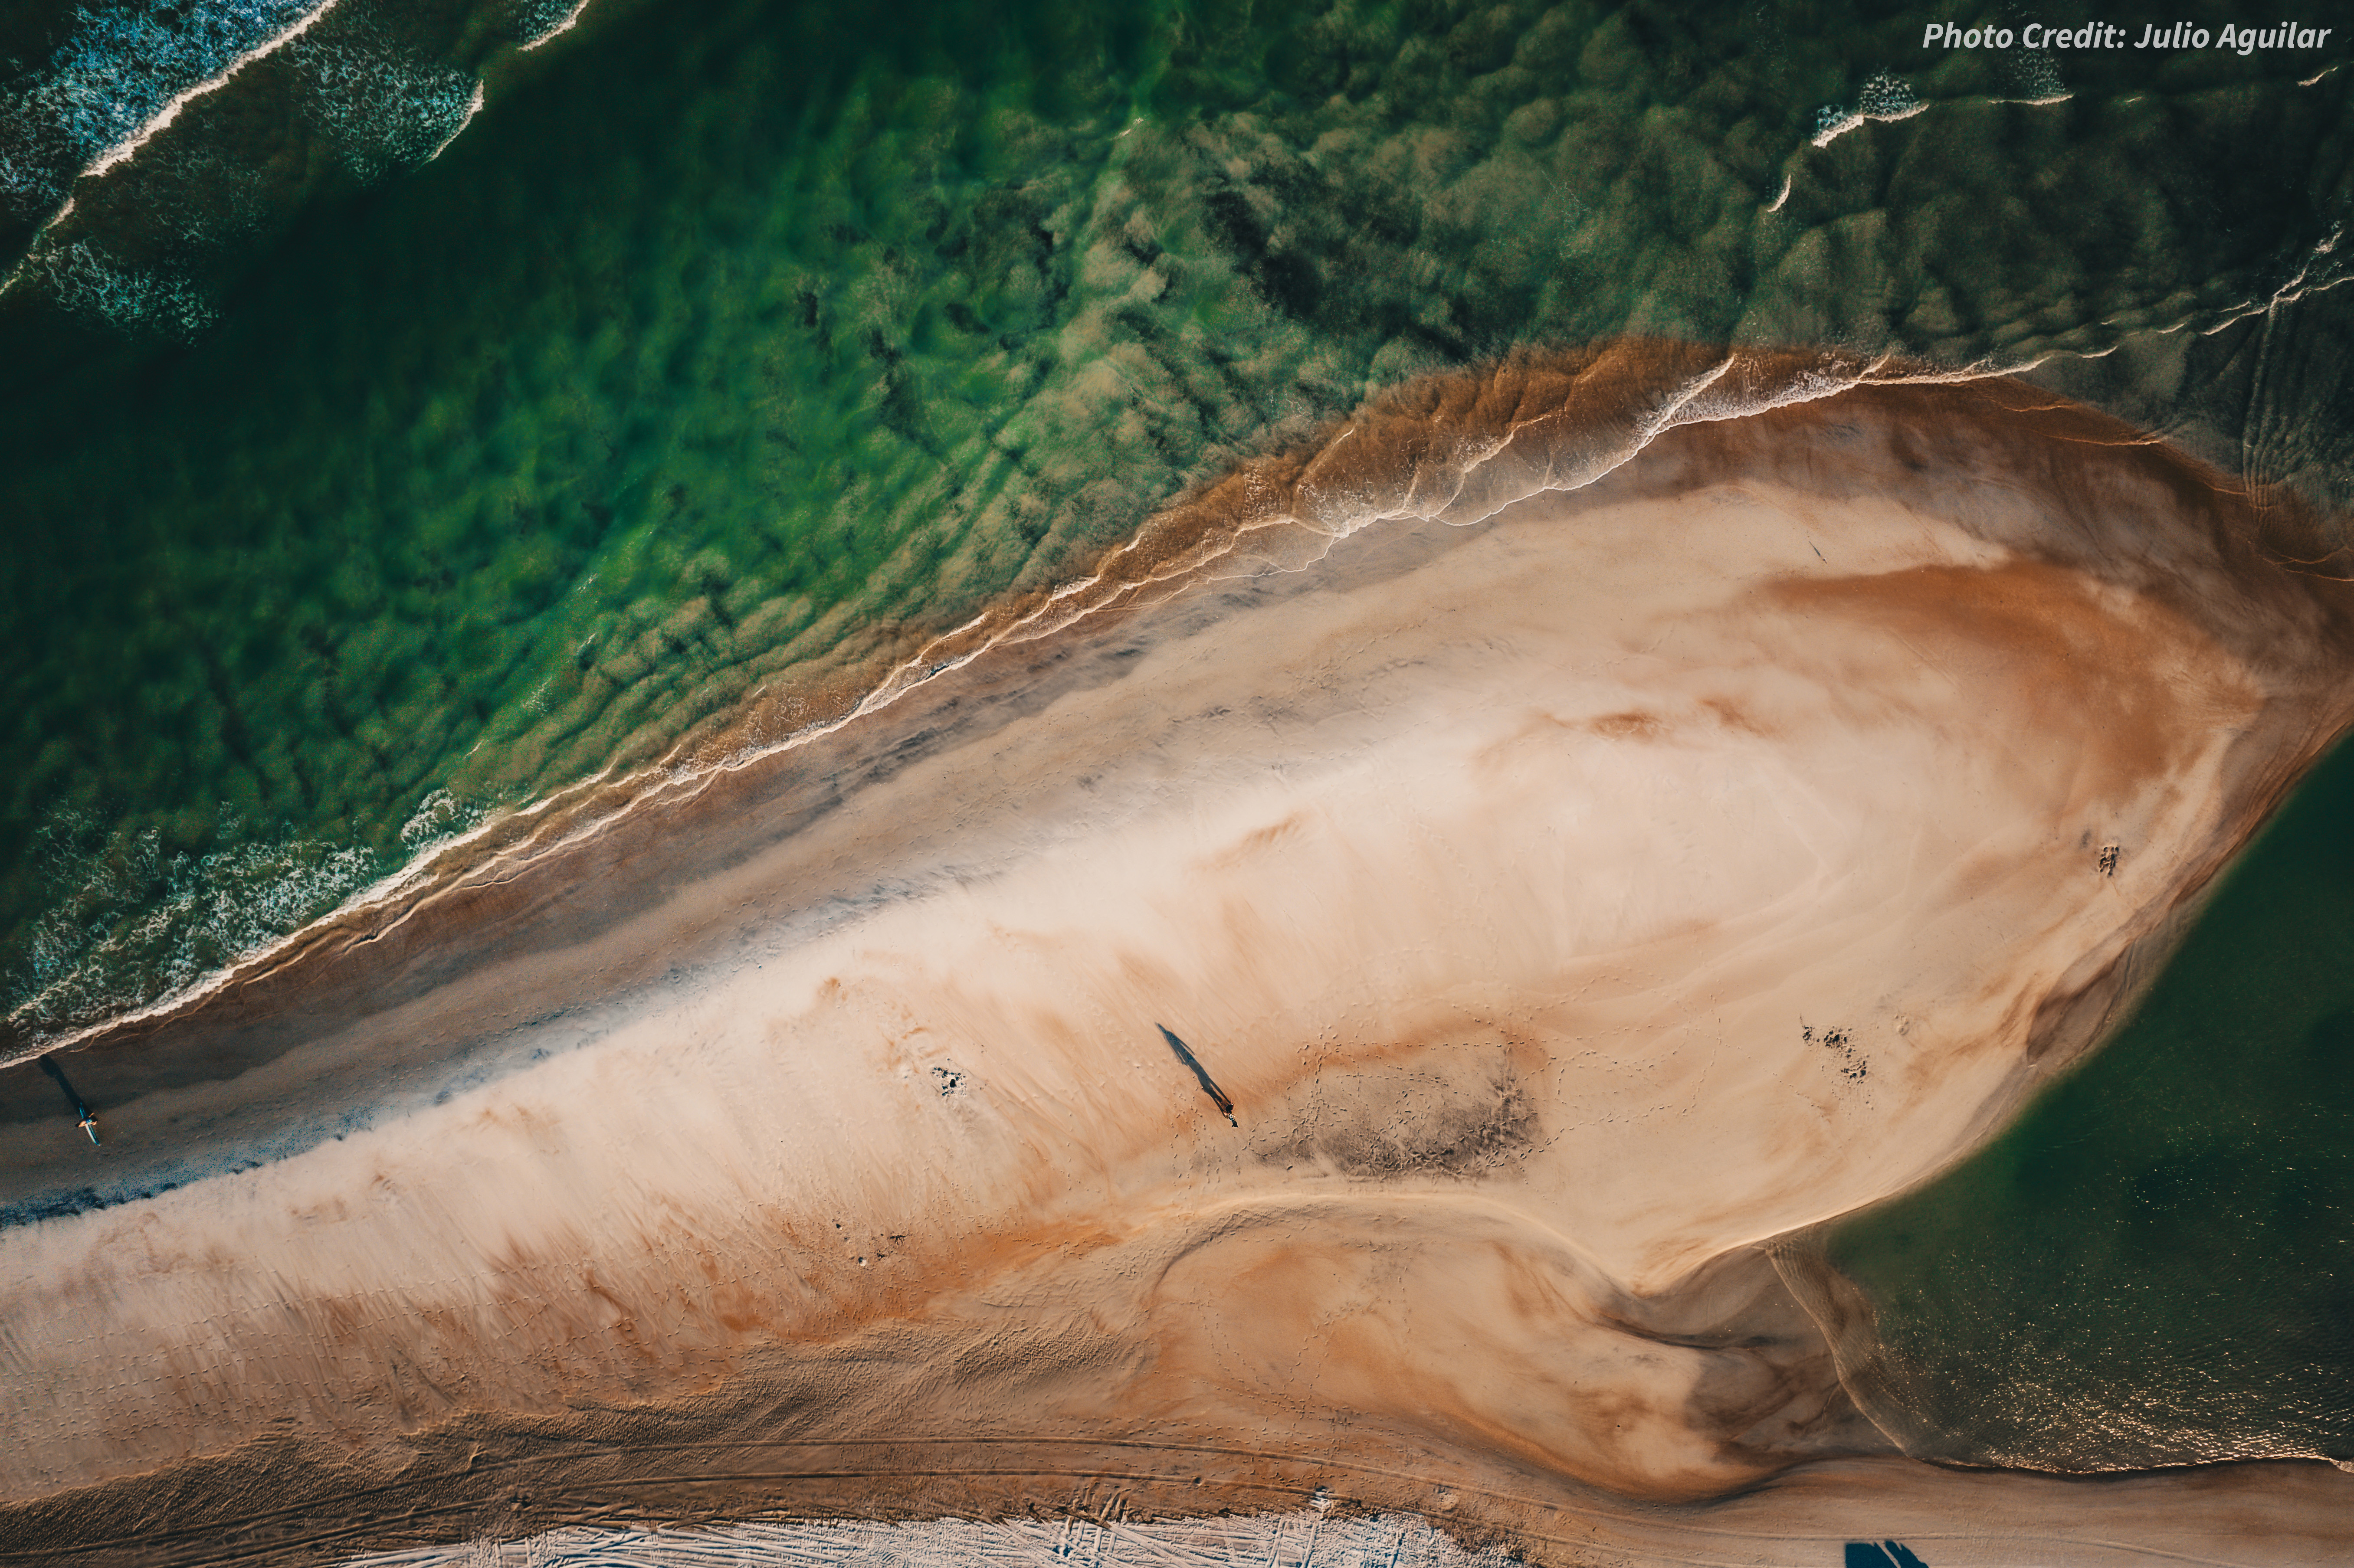 An aerial view of a sandbar going into green ocean waves as a person stands on the shore, casting a shadow far below.